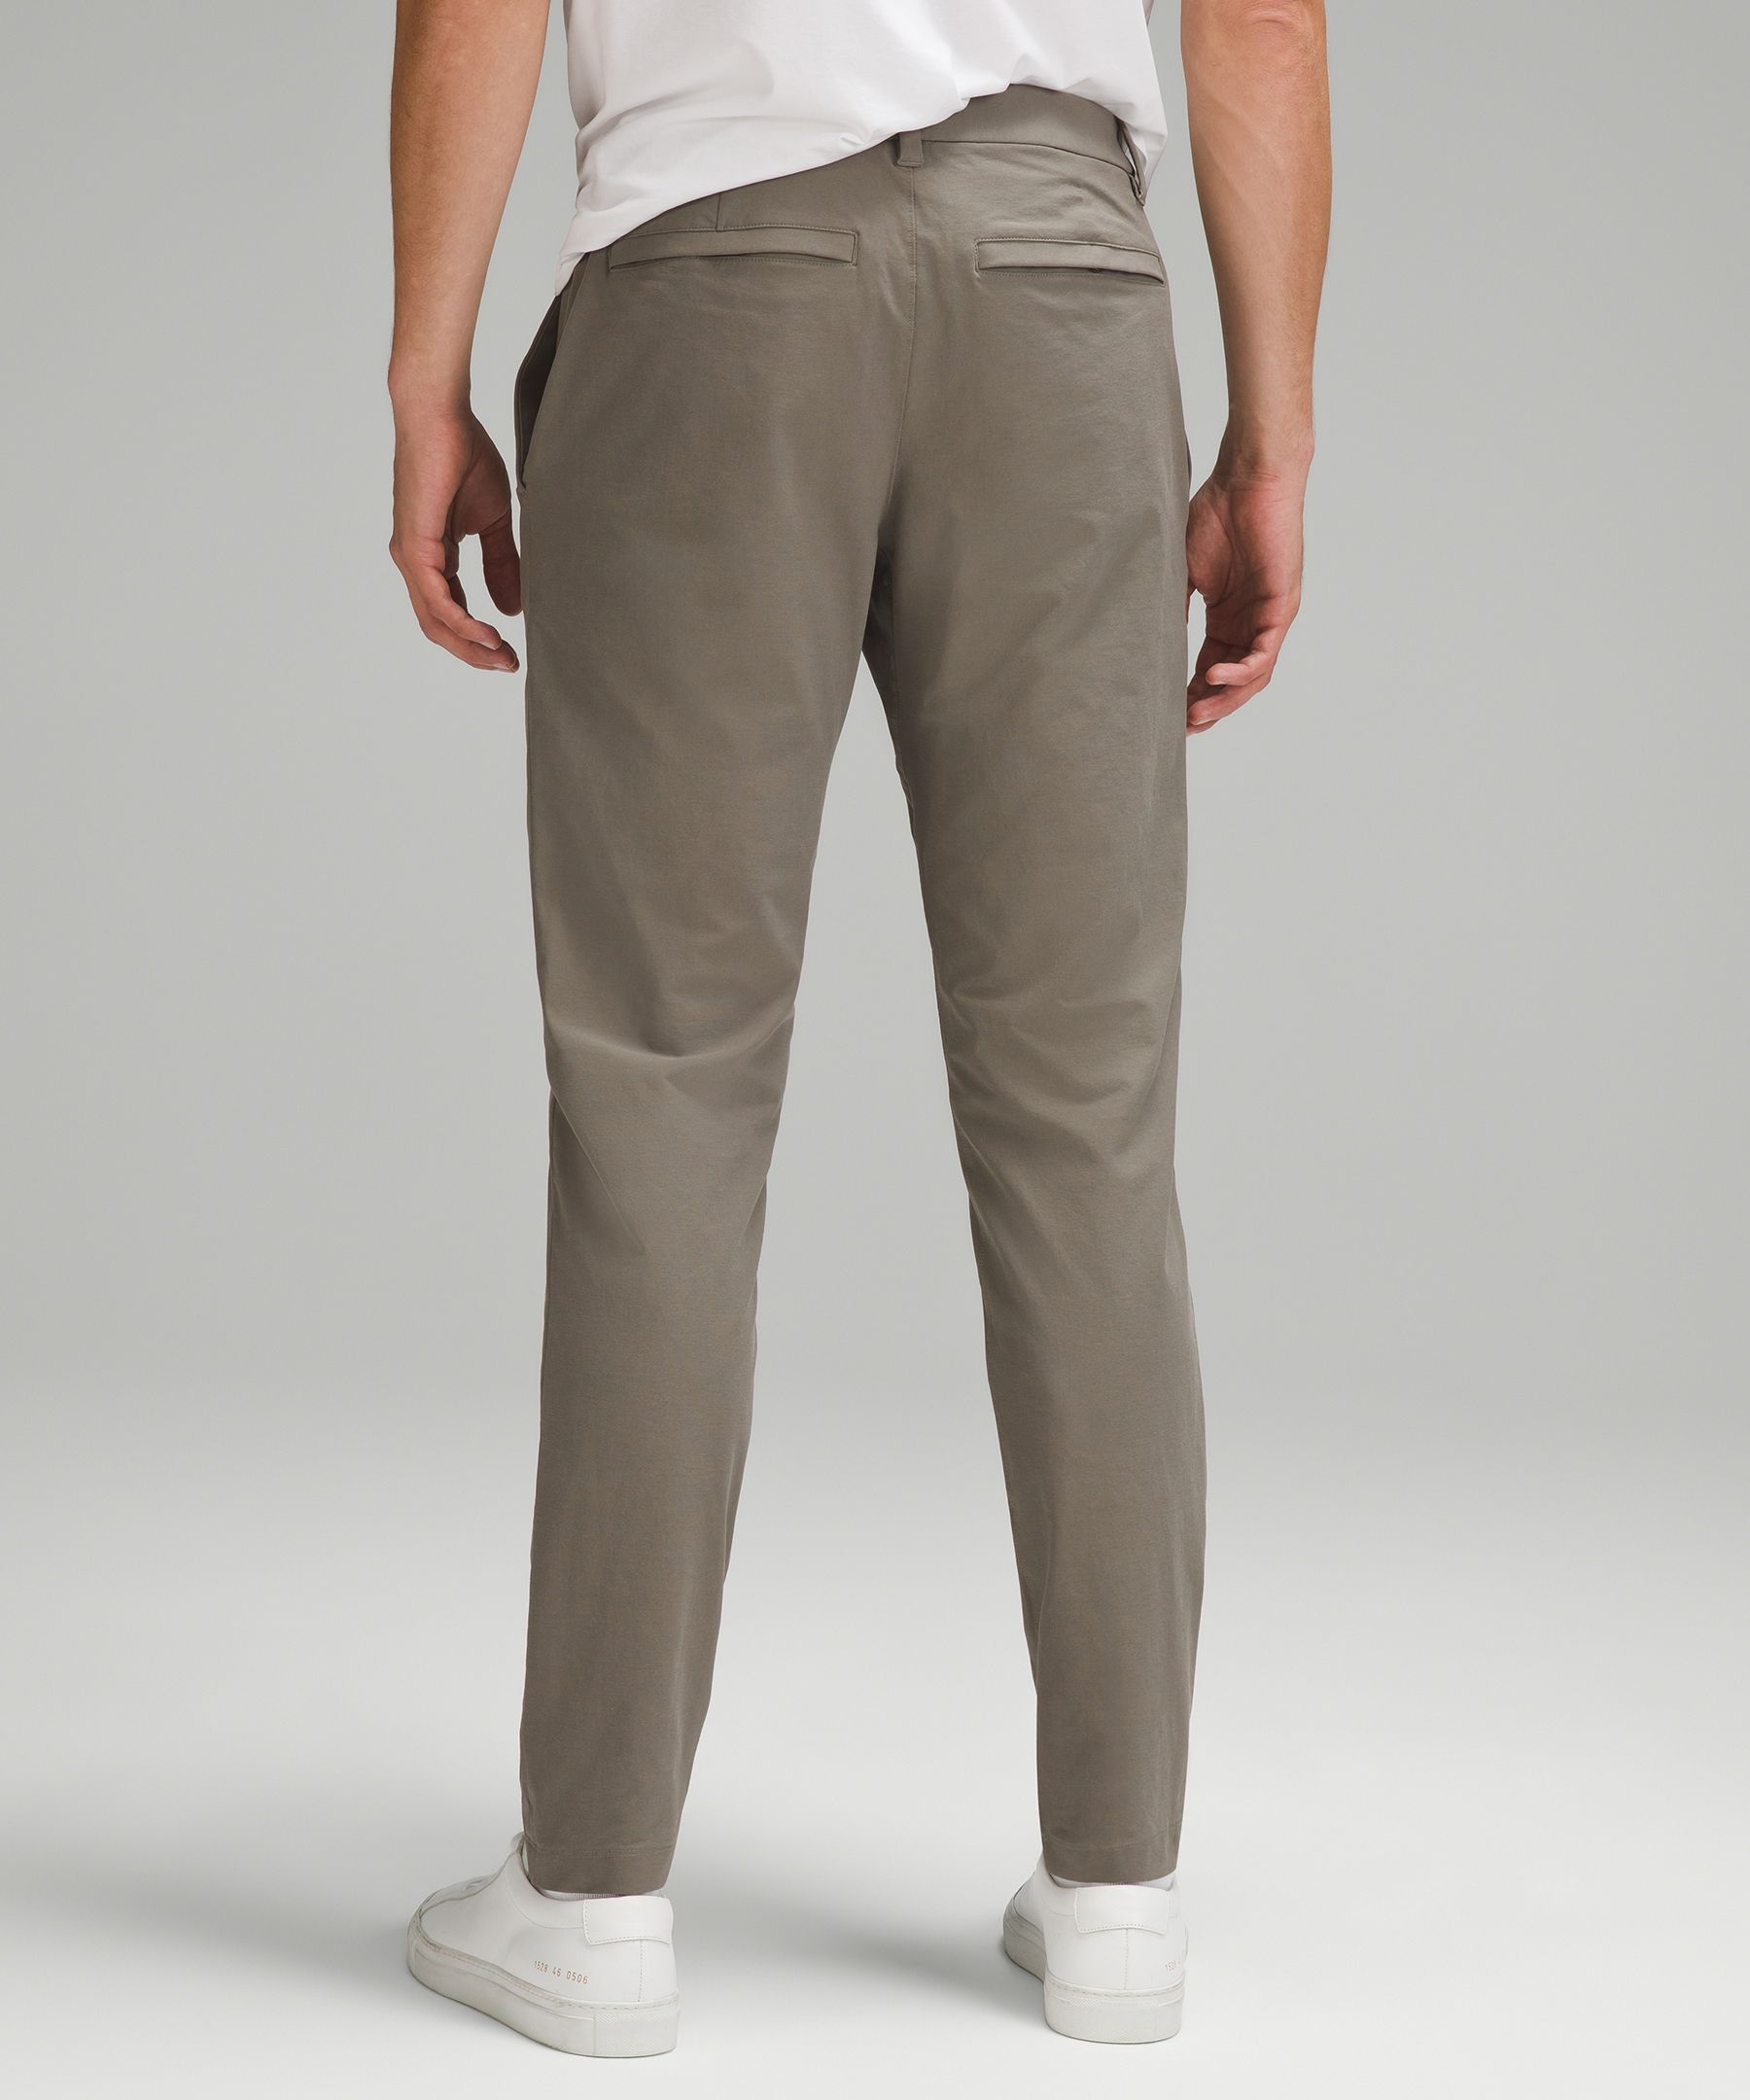 How do the Marc New York 4 way stretch pants compare to similar stretch  pants like the Lululemon ABC pants? : r/Costco